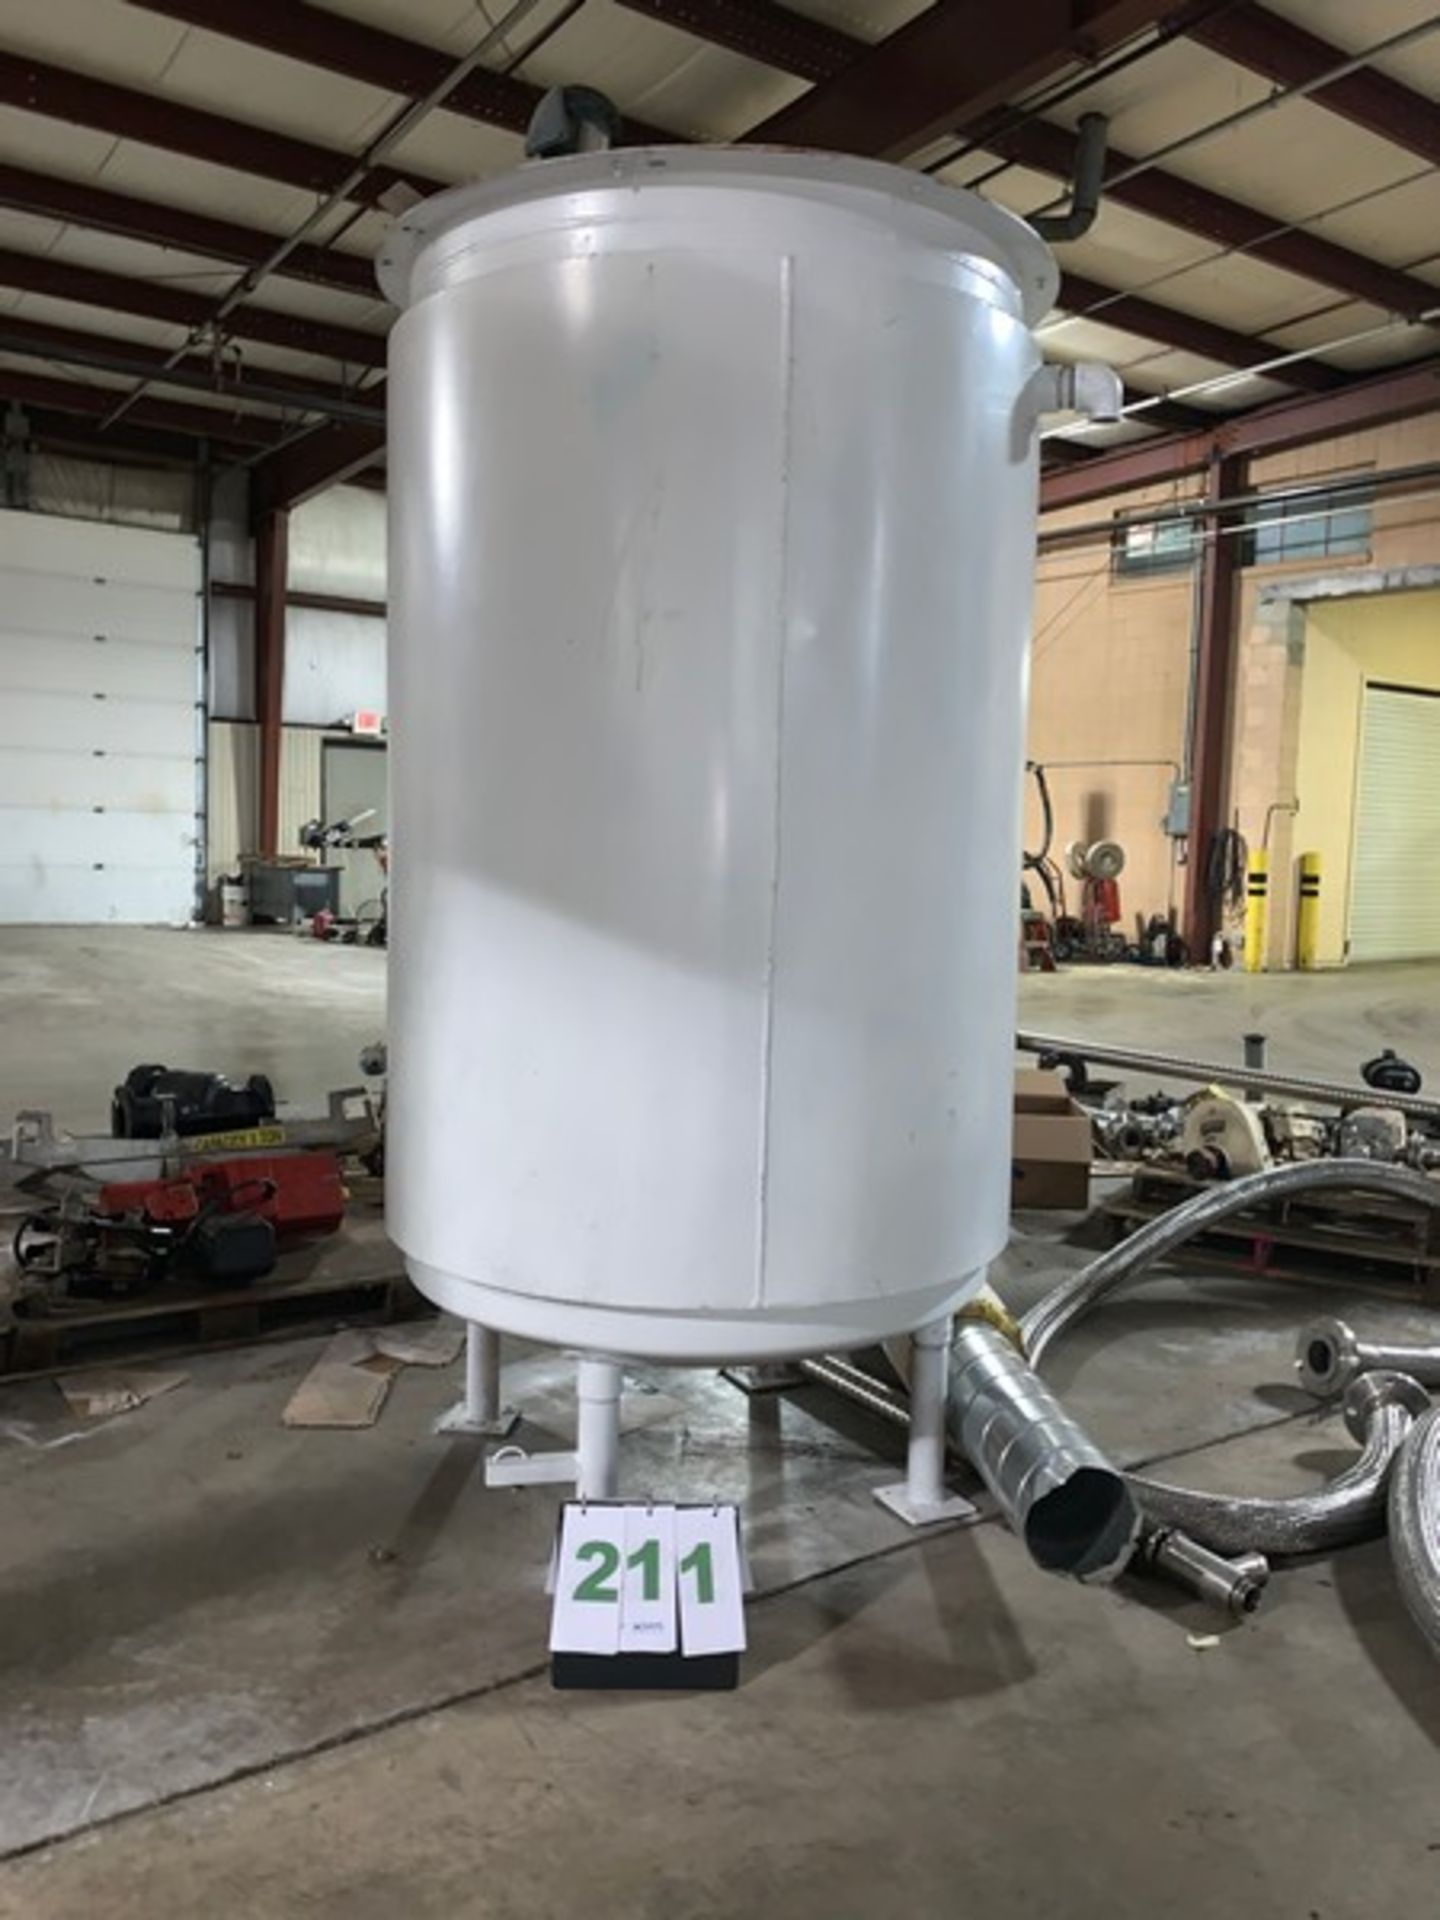 500 Gallon Mild Steel Jacketed Mix Tank with Lightnin Mixer. $200 Loading fee, Free Removal and